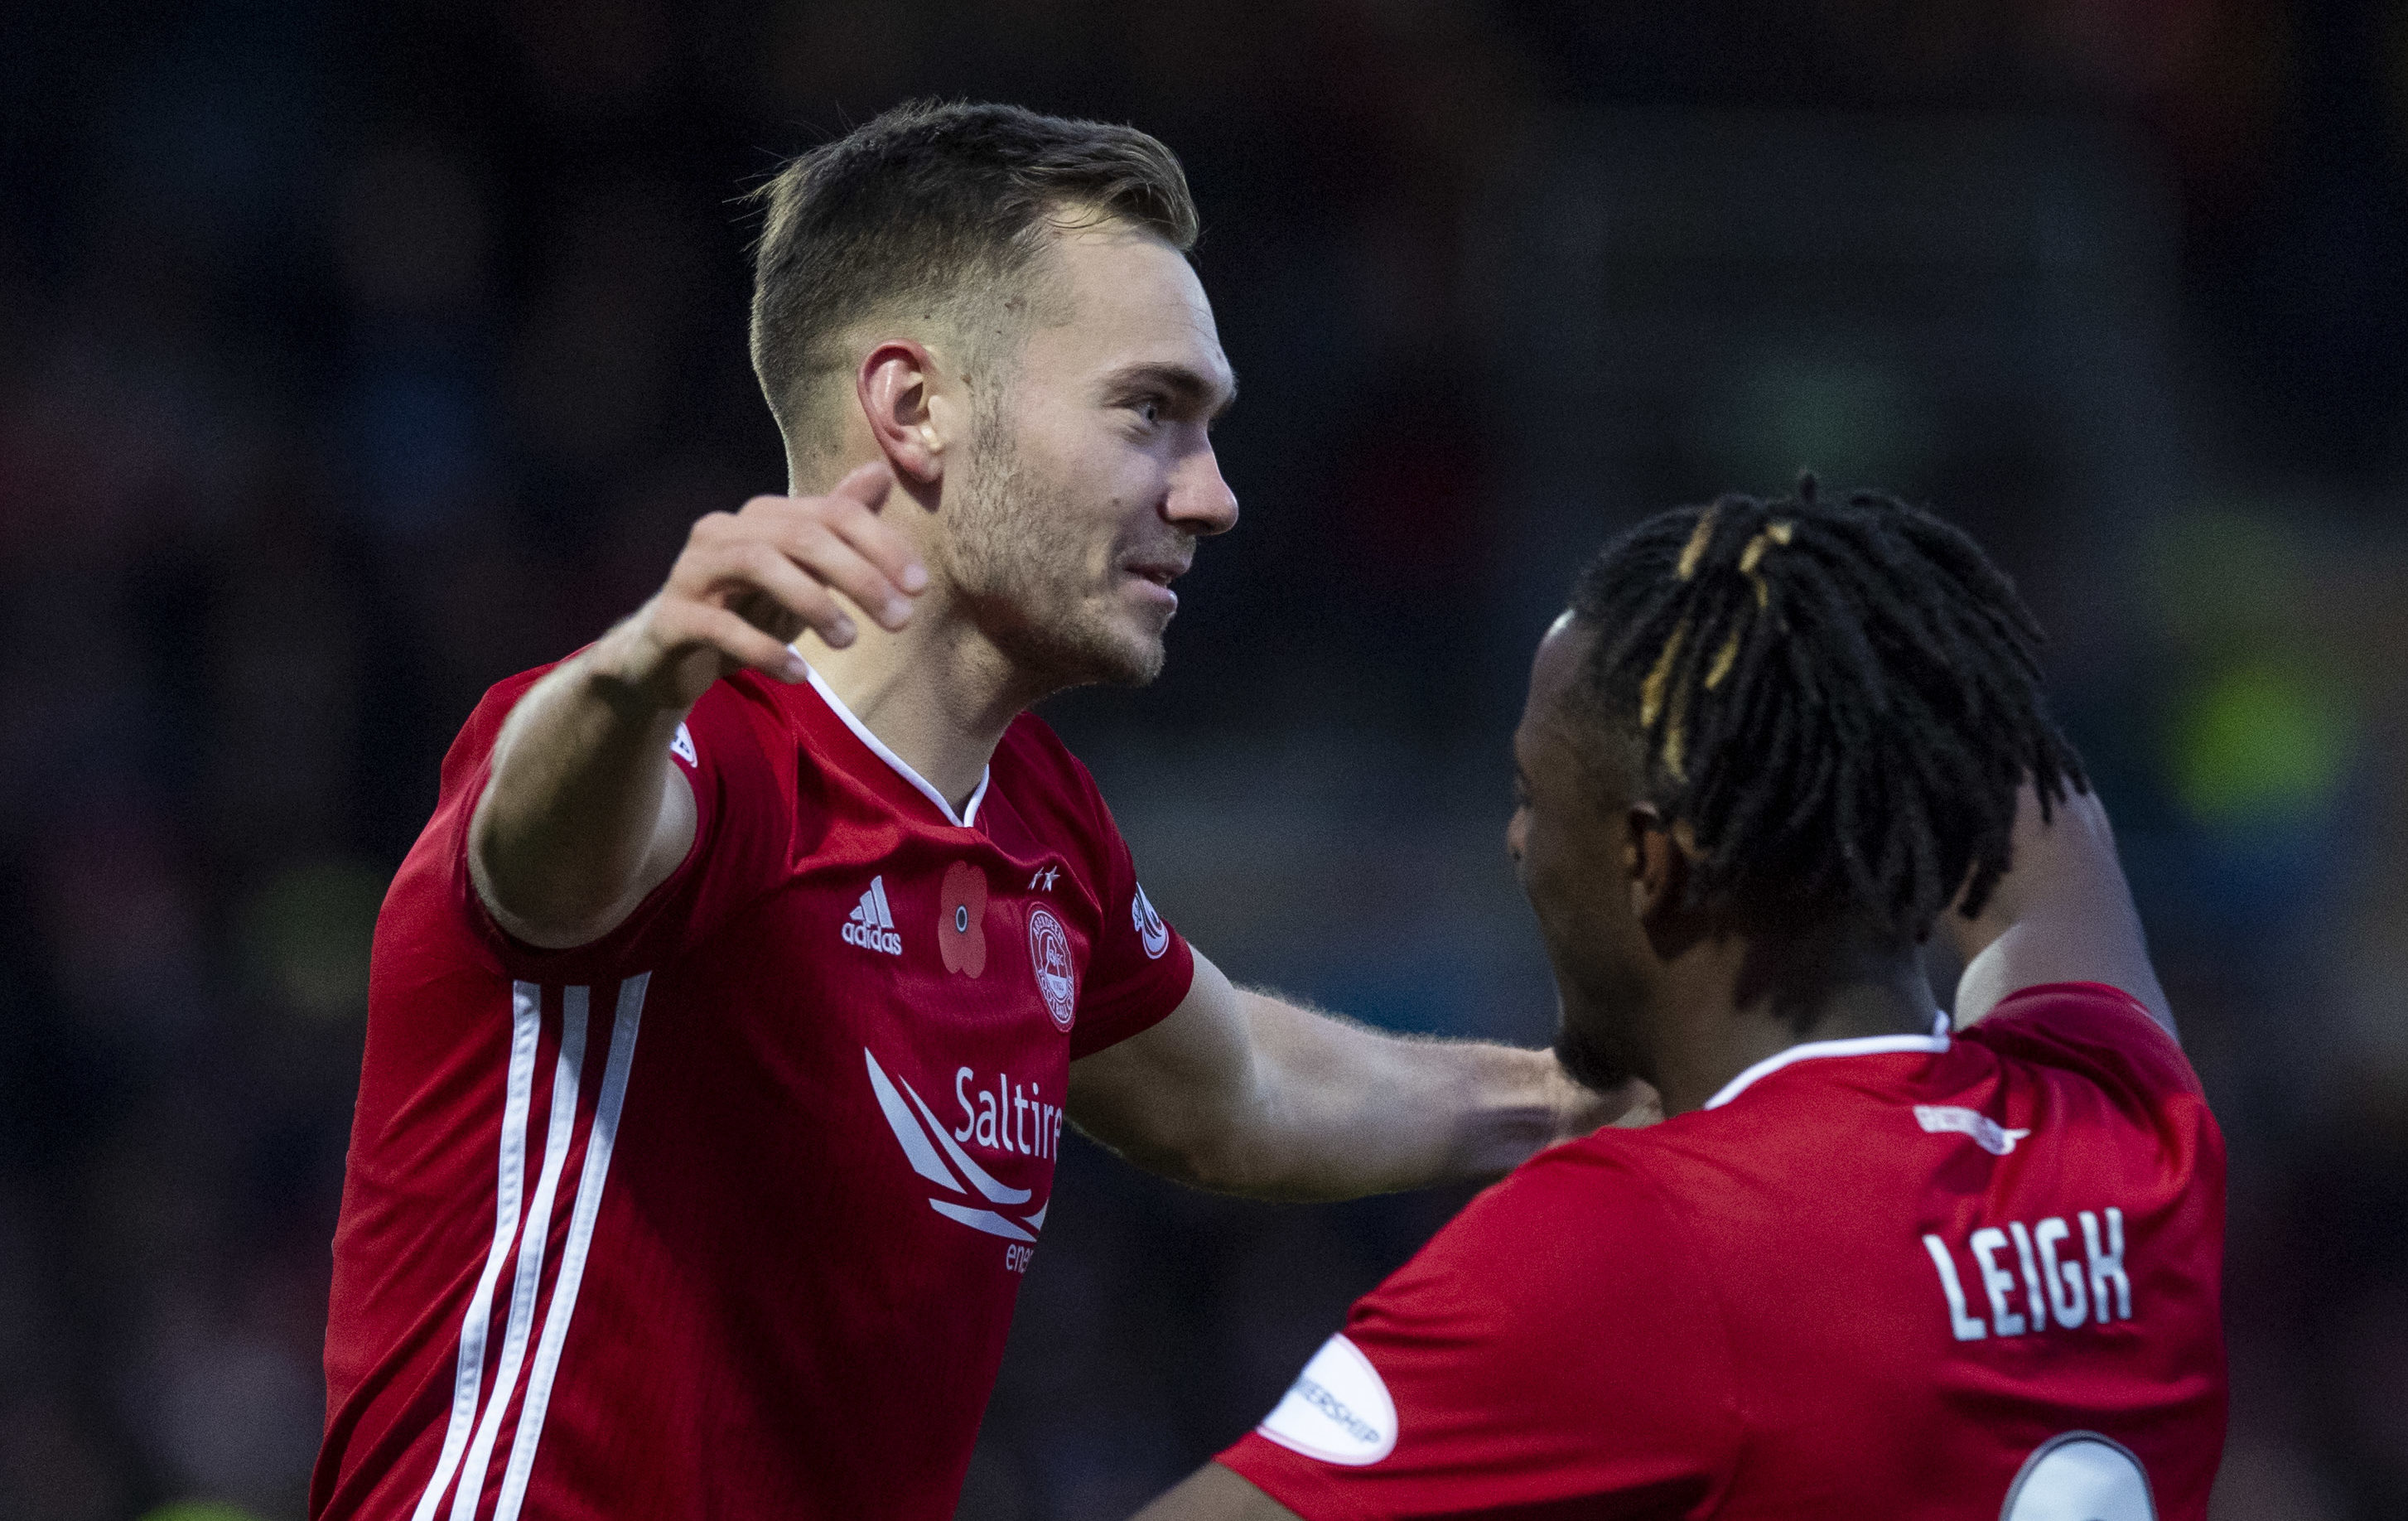 Aberdeen's Ryan Hedges (L) celebrates his goal to make it 2-1 with team mate Greg Leigh during the Ladbrokes Premiership match between Ross County and Aberdeen